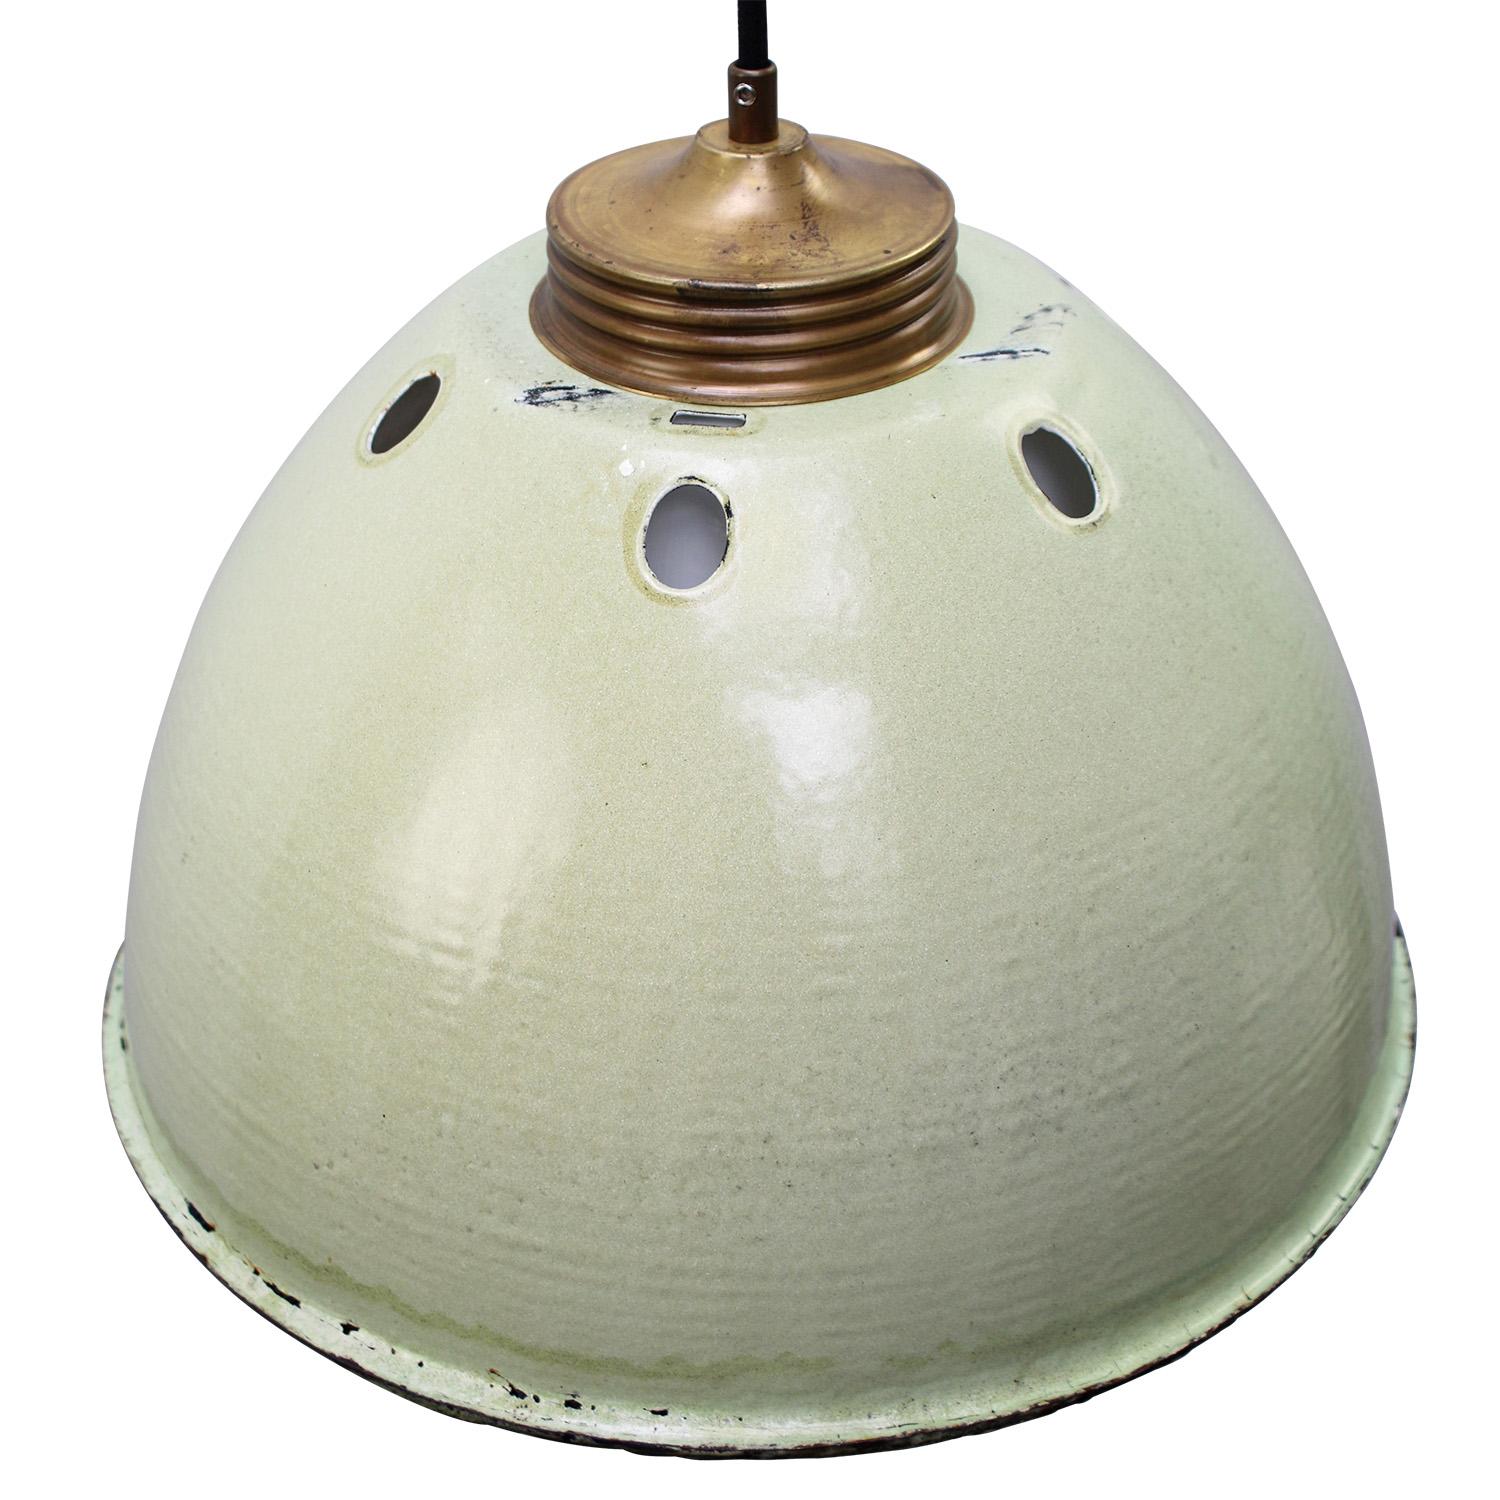 Vintage industrial pendant made of green enamel with brass top.
White interior and opaline glass

Weight: 3.00 kg / 6.6 lb

Priced per individual item. All lamps have been made suitable by international standards for incandescent light bulbs,